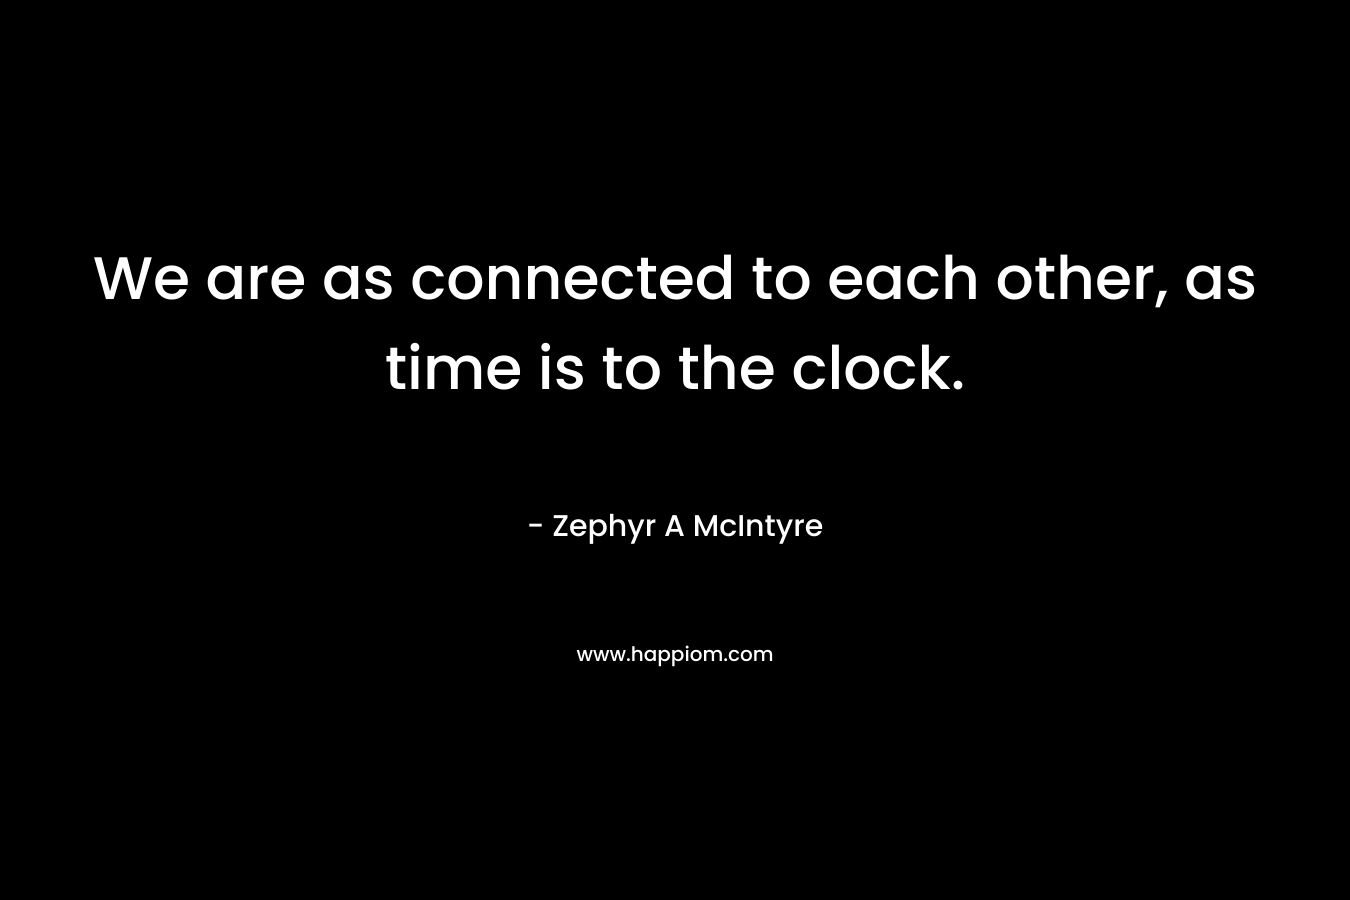 We are as connected to each other, as time is to the clock. – Zephyr A McIntyre